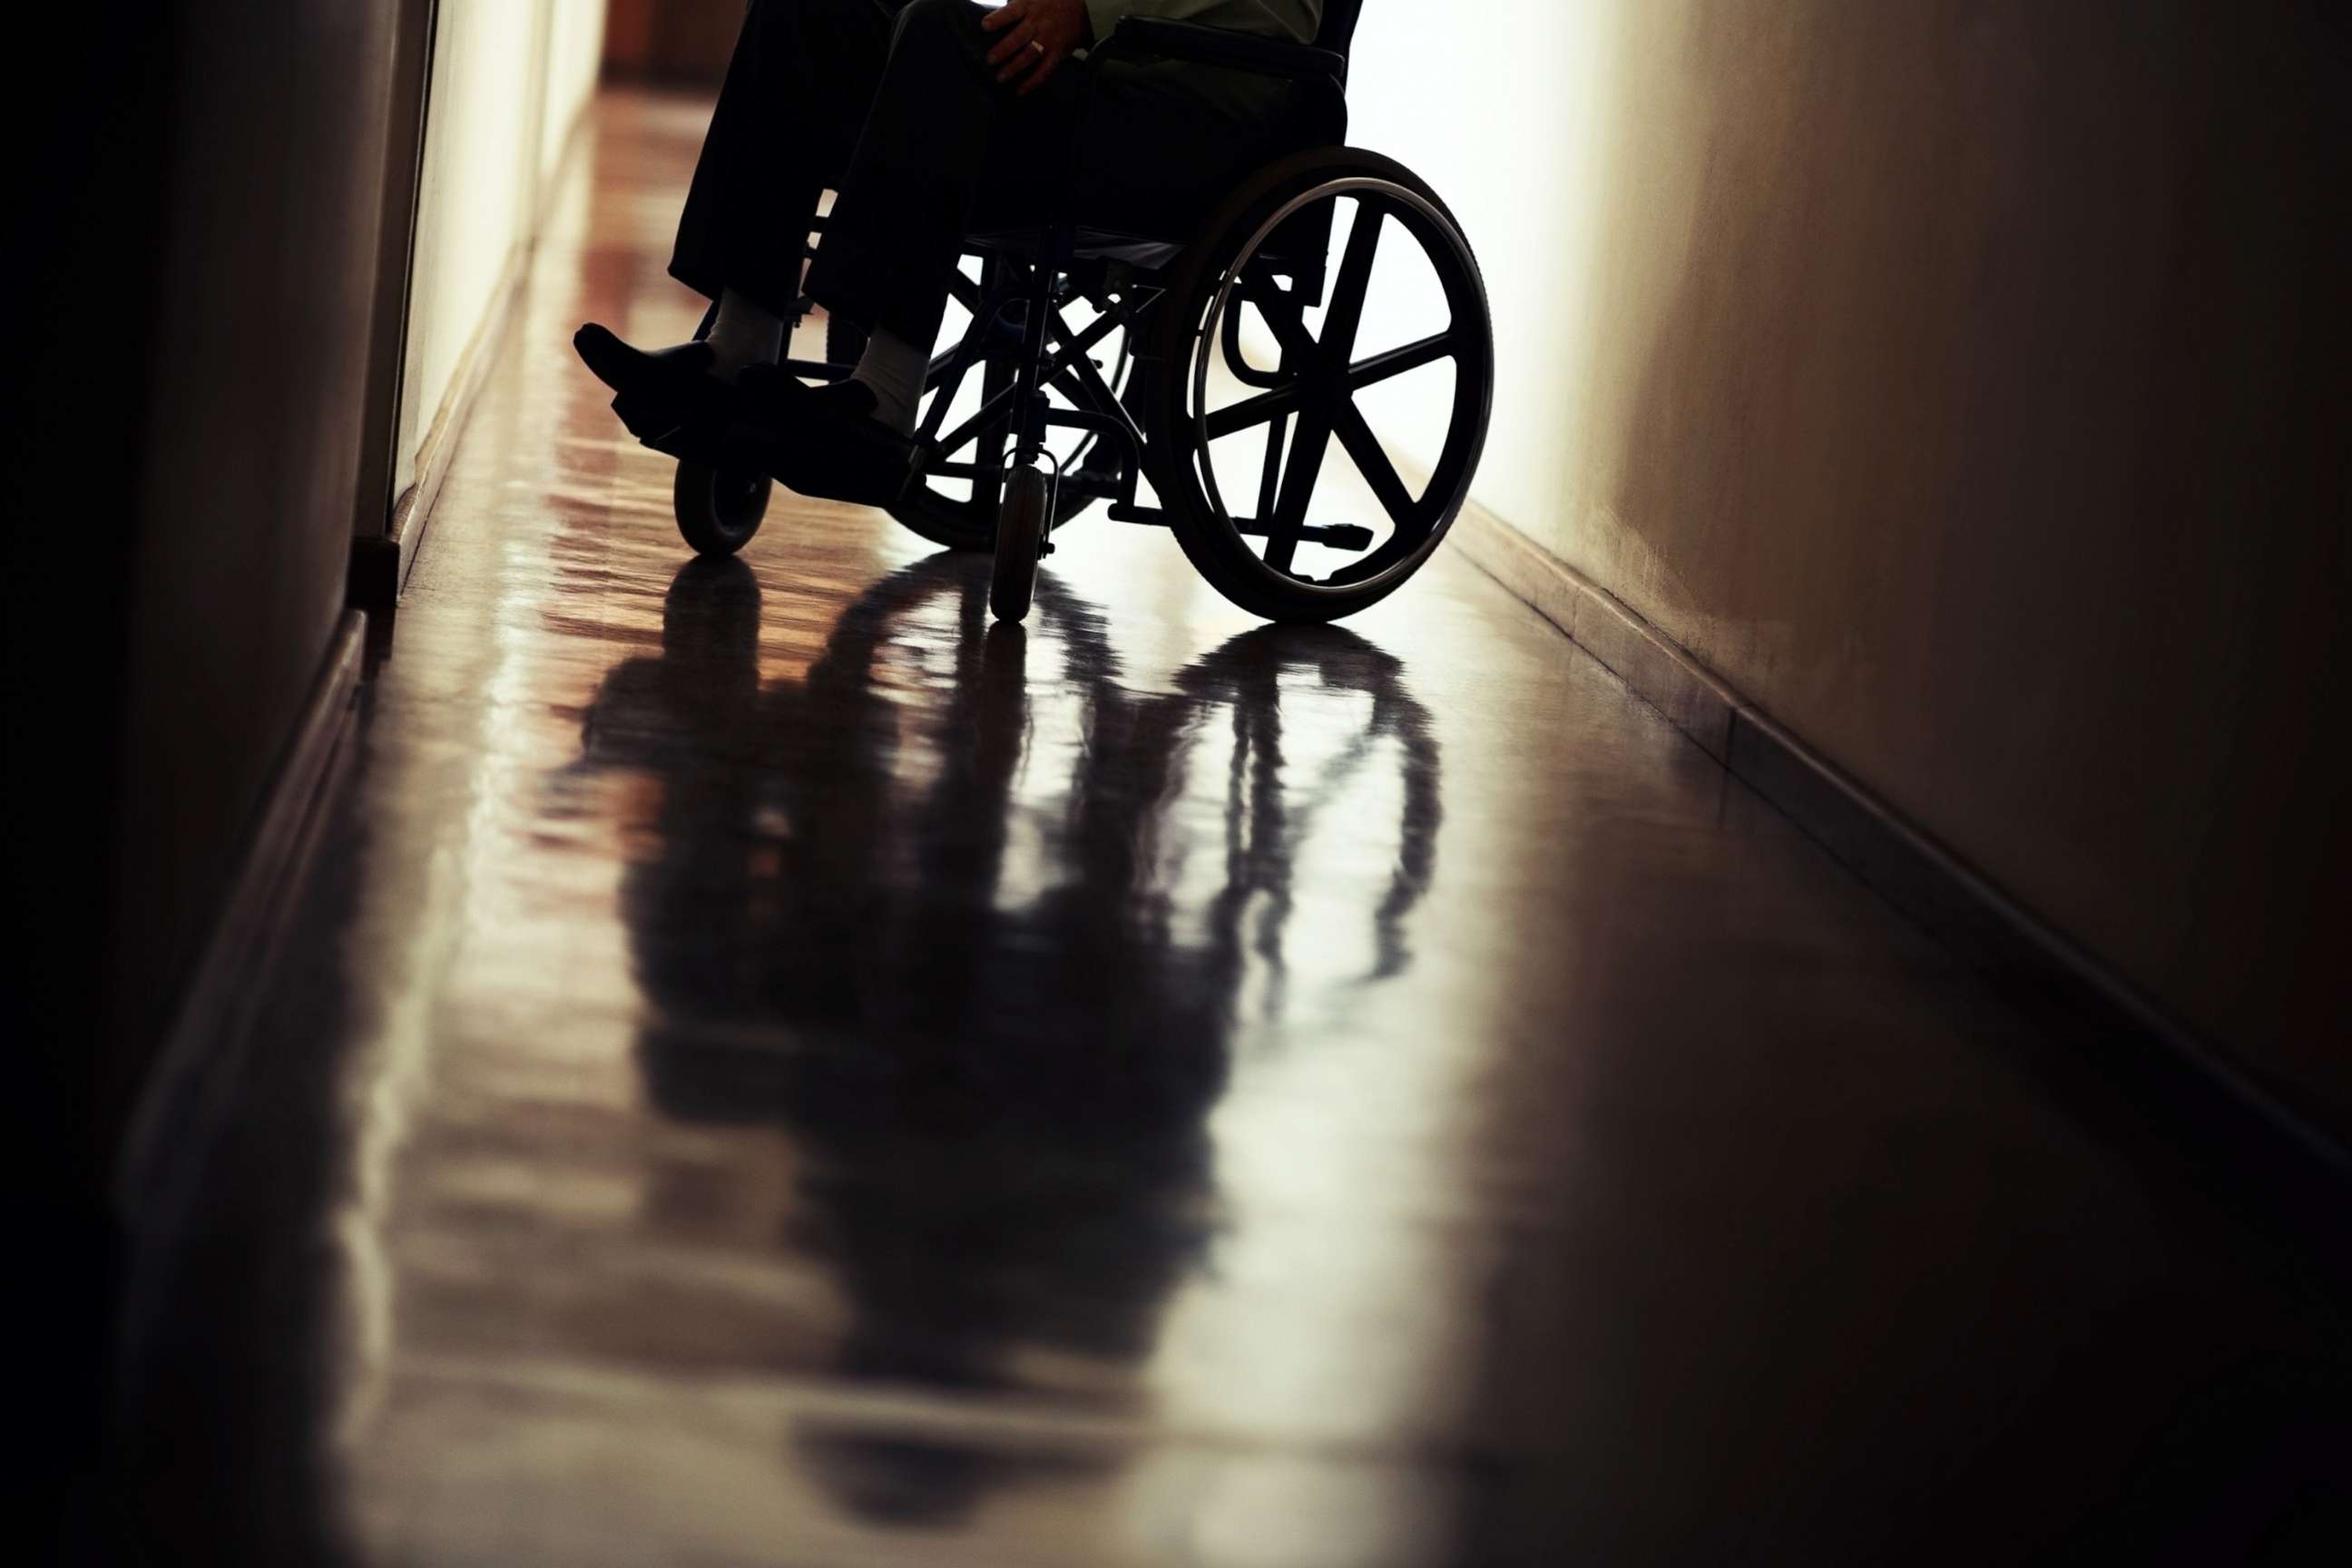 Crime against disabled people is rising and advocates say more needs to be done